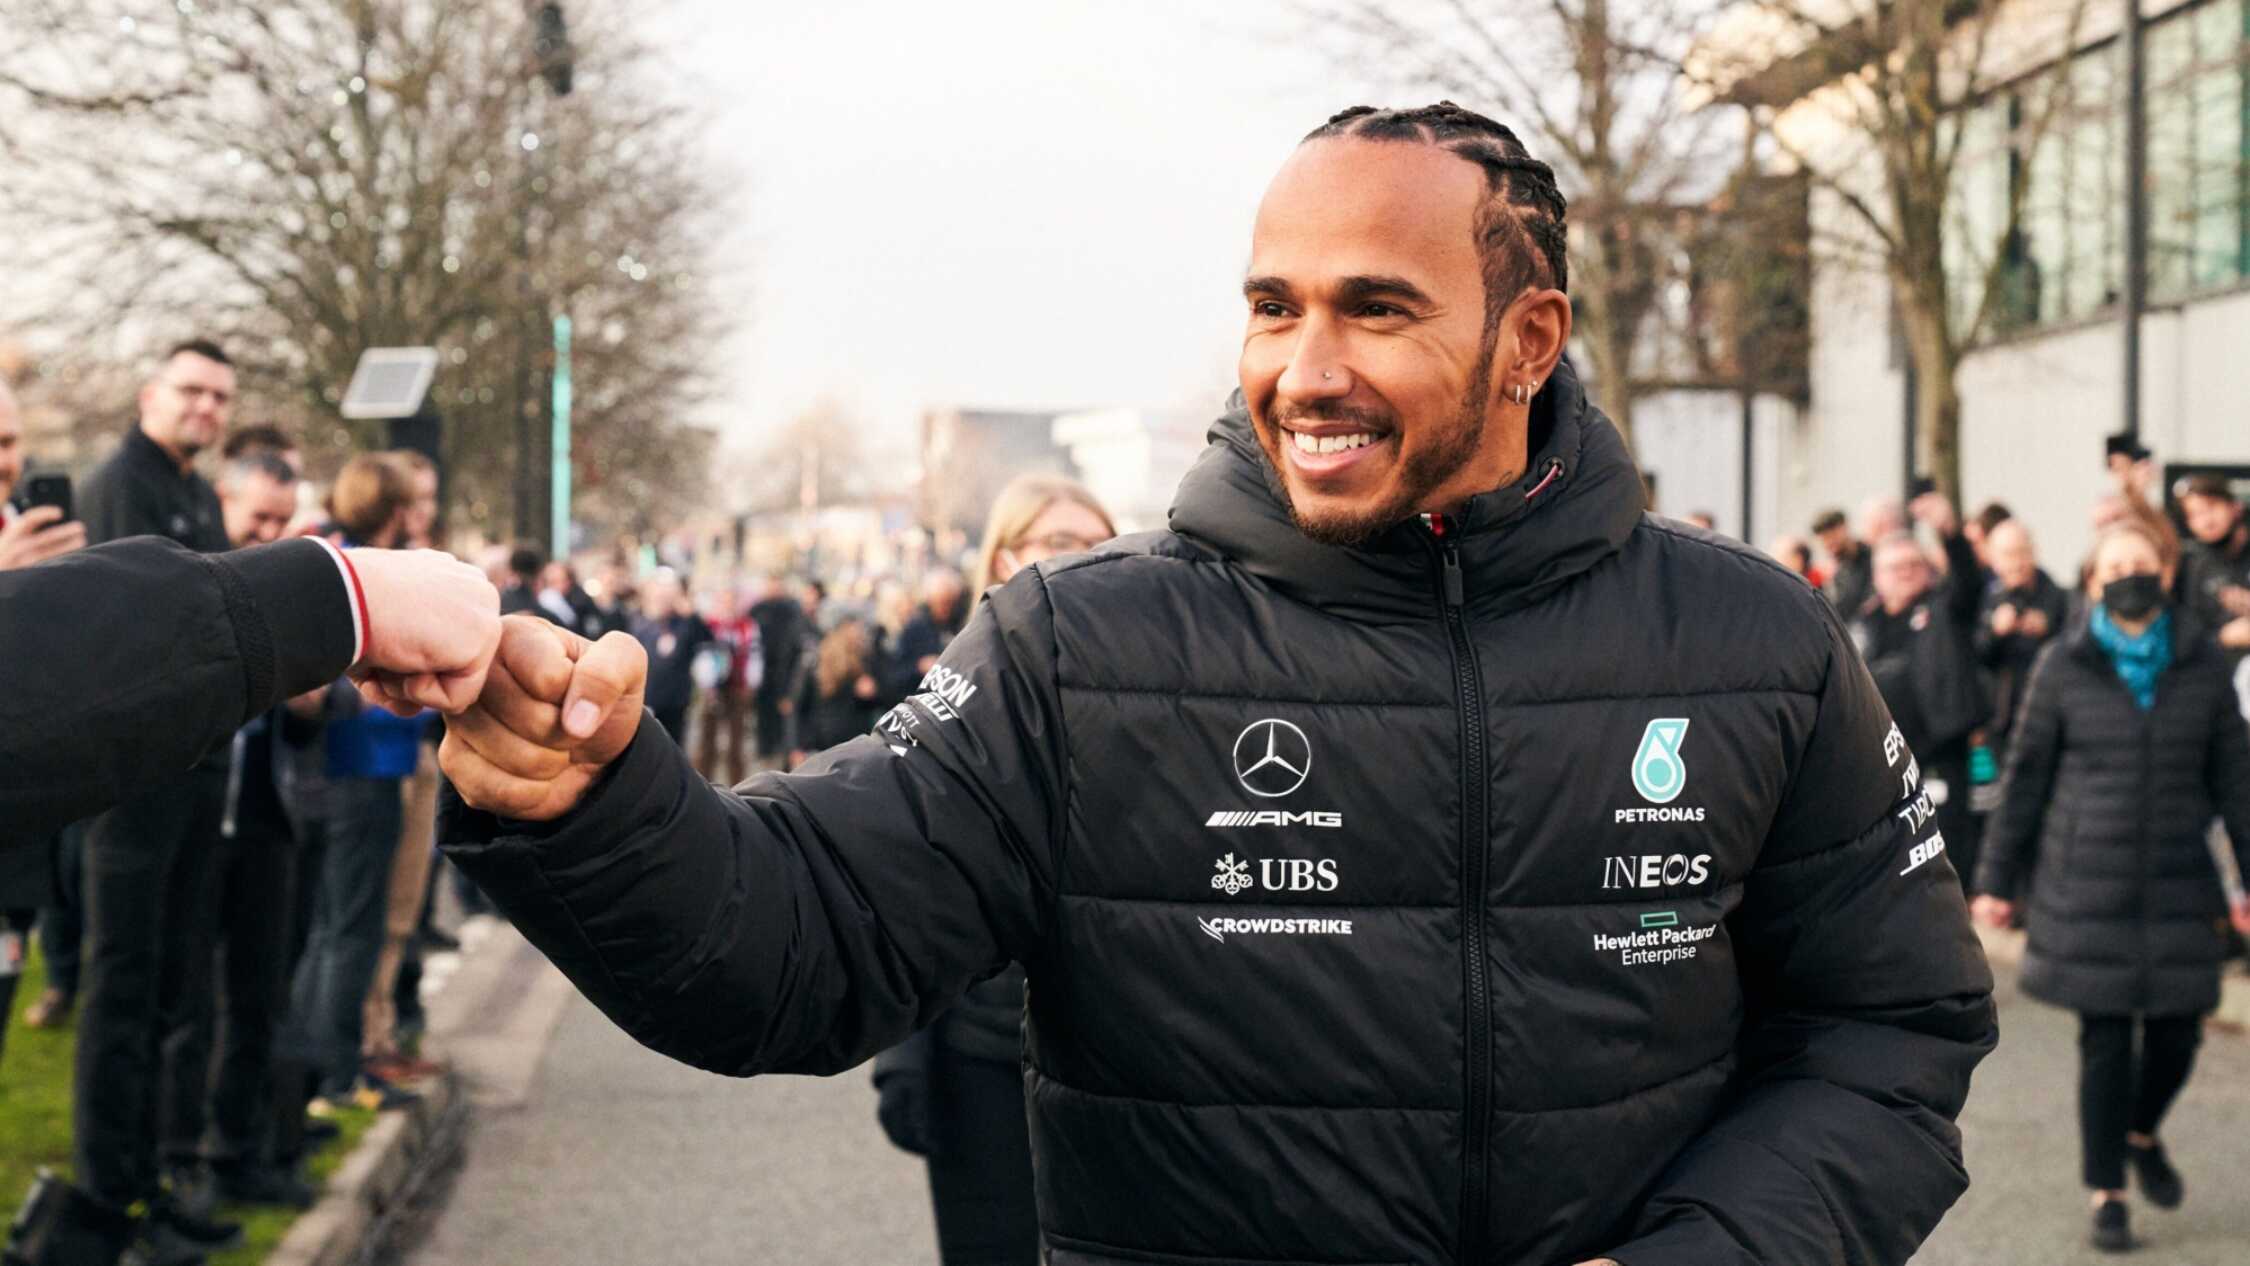 Hamilton talks about his activities over the winter break in Formula One